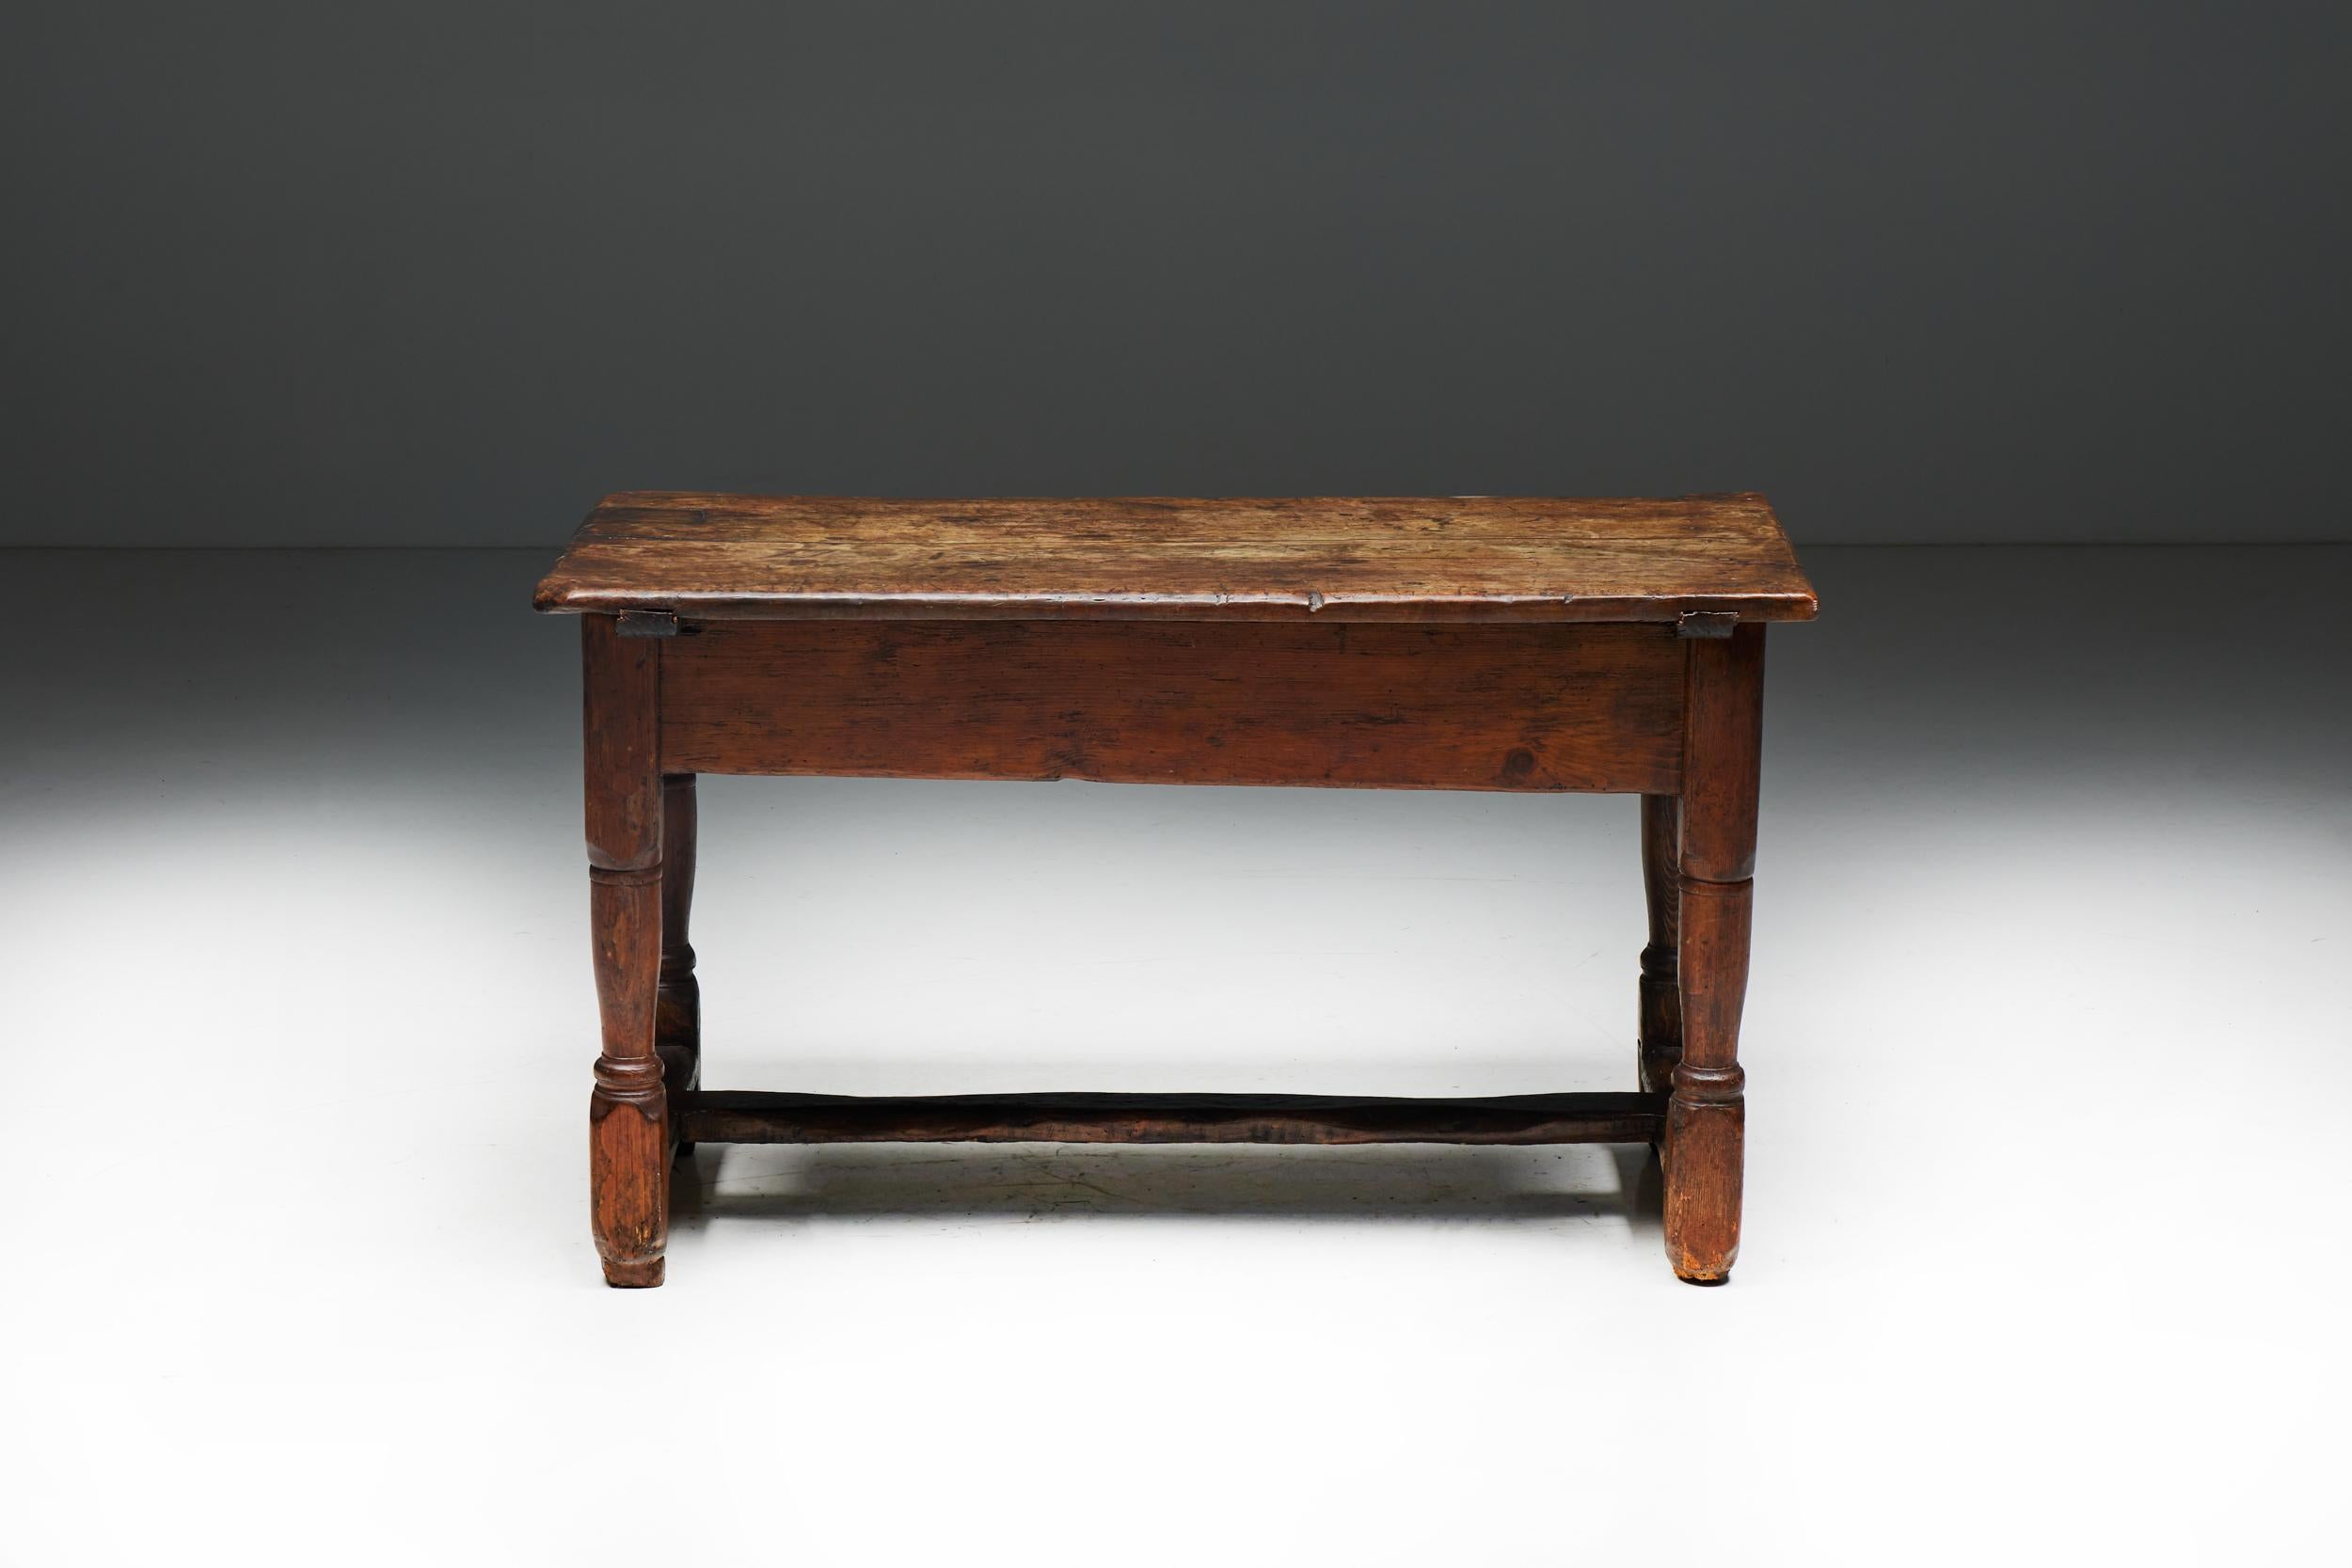 Wood Rustic Art Populaire Writing Table, France, Early 20th Century For Sale